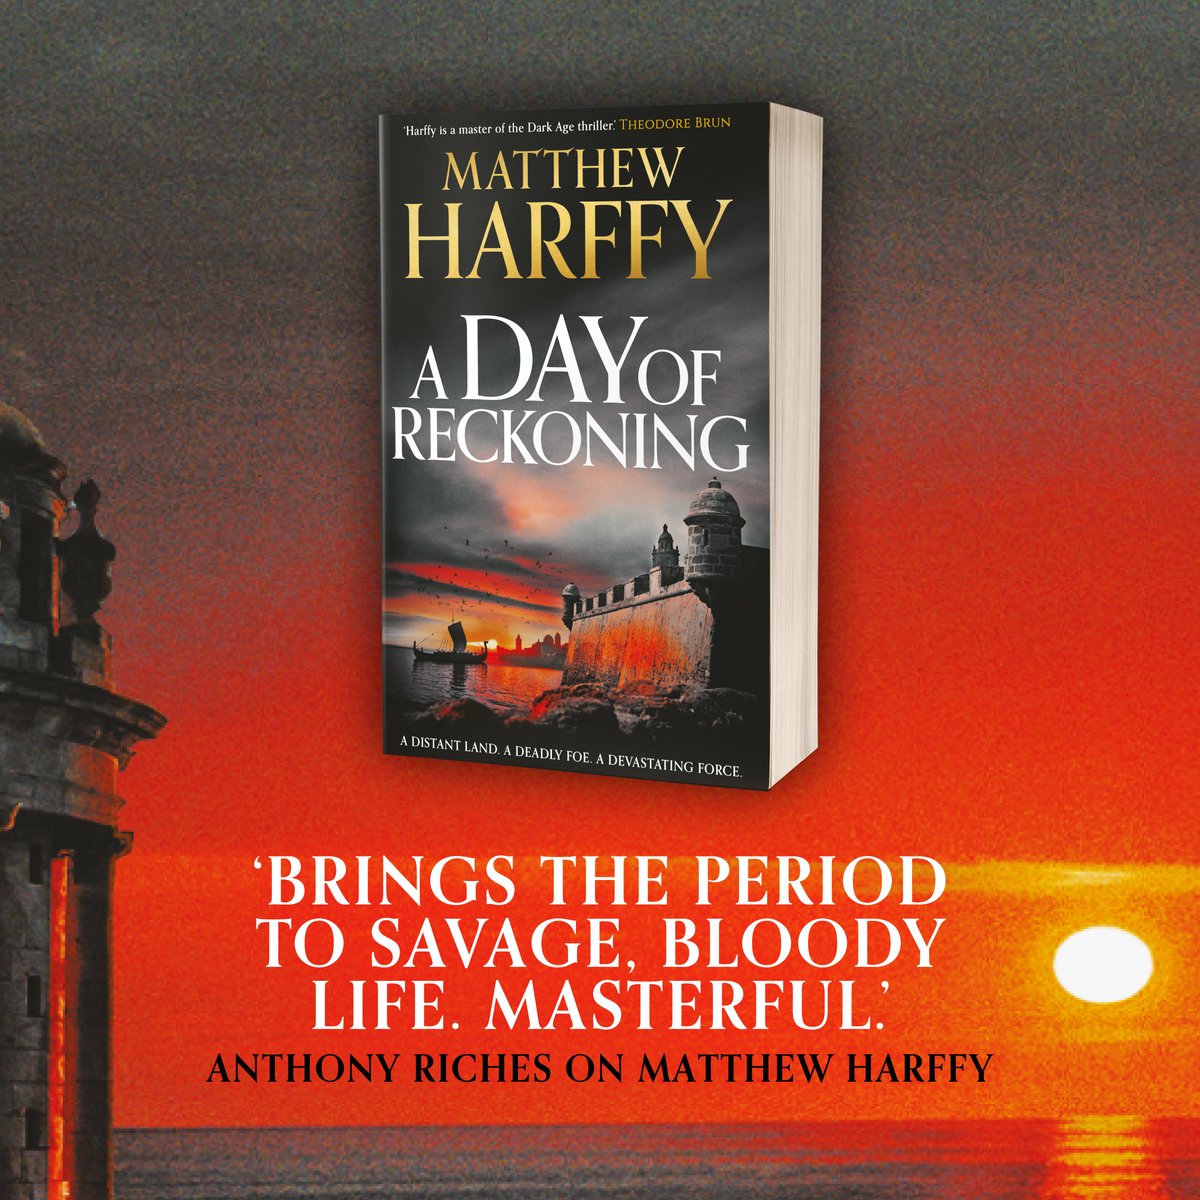 Hunlaf battles peril and intrigue on a dangerous voyage to Muslim Spain... ⚔️ #ADayOfReckoning is the third thrilling historical adventure in the #ATimeForSwords series by @MatthewHarffy Coming in paperback: amzn.to/3TSjebG